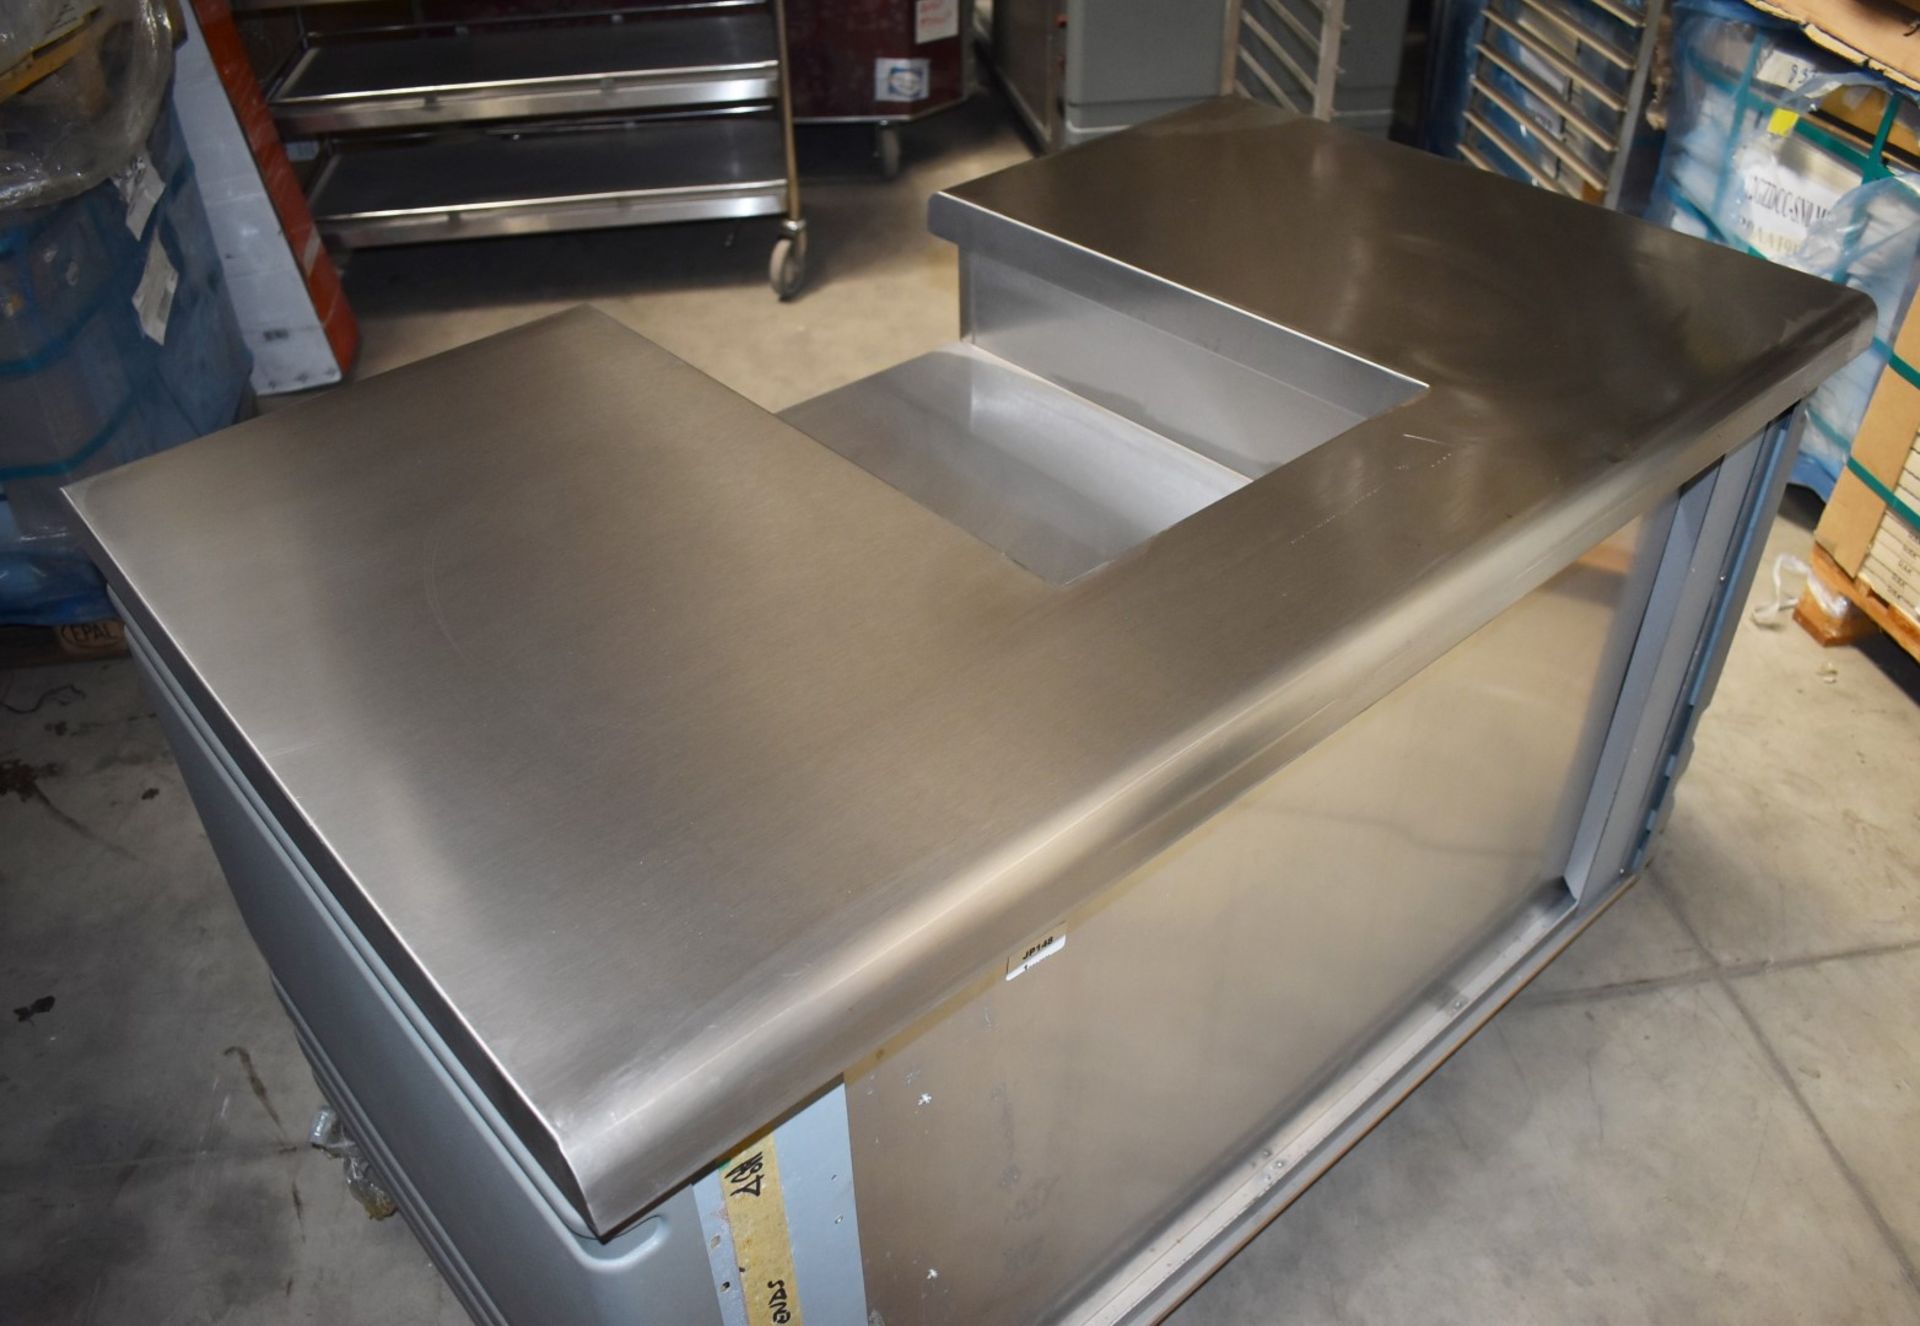 1 x Grundy Commercial Mobile Servery Unit With Stainless Steel Top Featuring Insert For Appliance or - Image 9 of 12